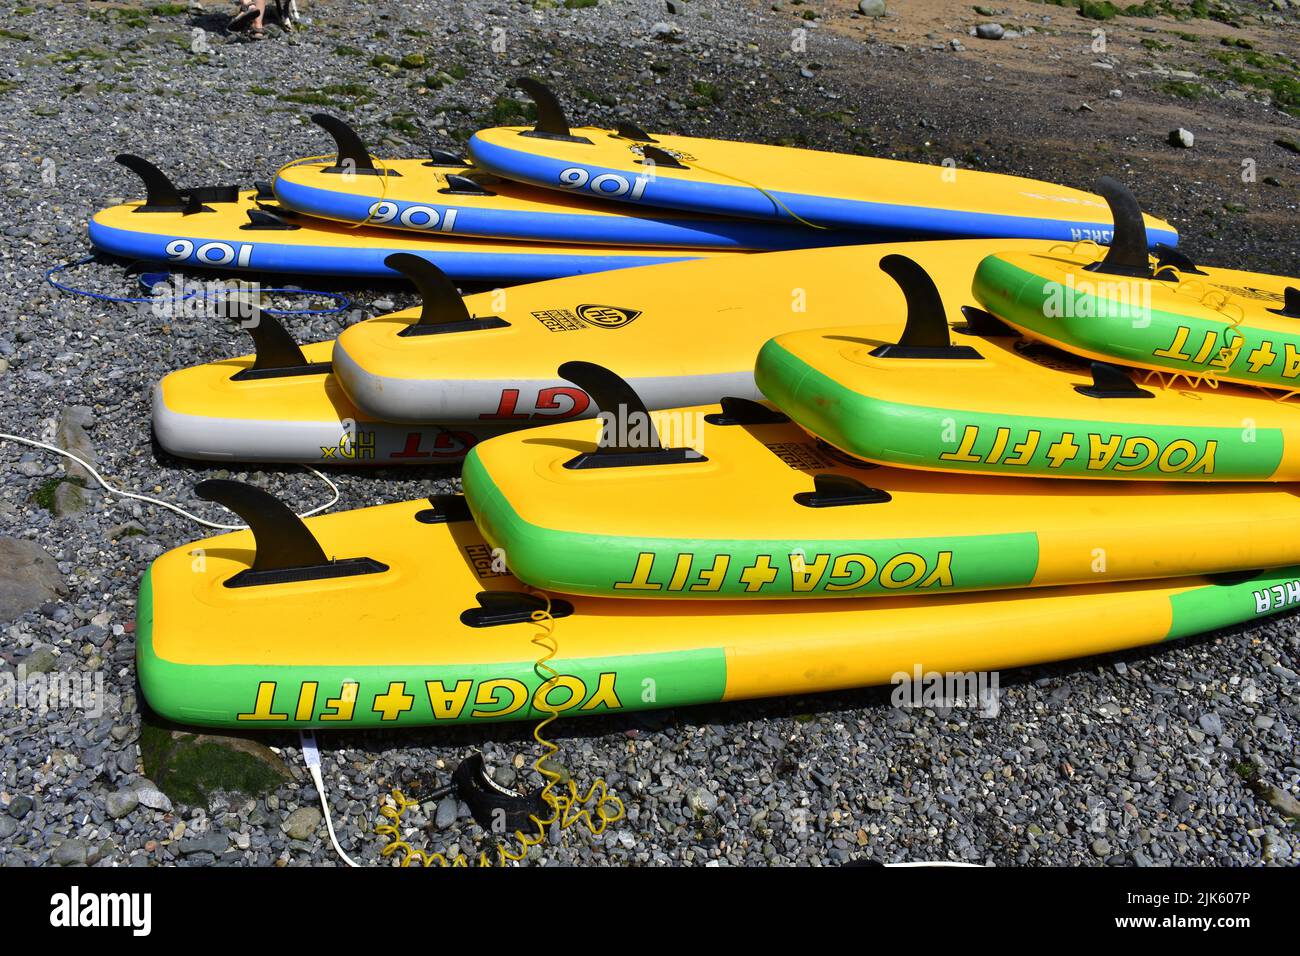 Yellow stand up paddle boards stacked on the beach, Stackpole Quay, Stackpole, Pembrokeshire, Wales Stock Photo